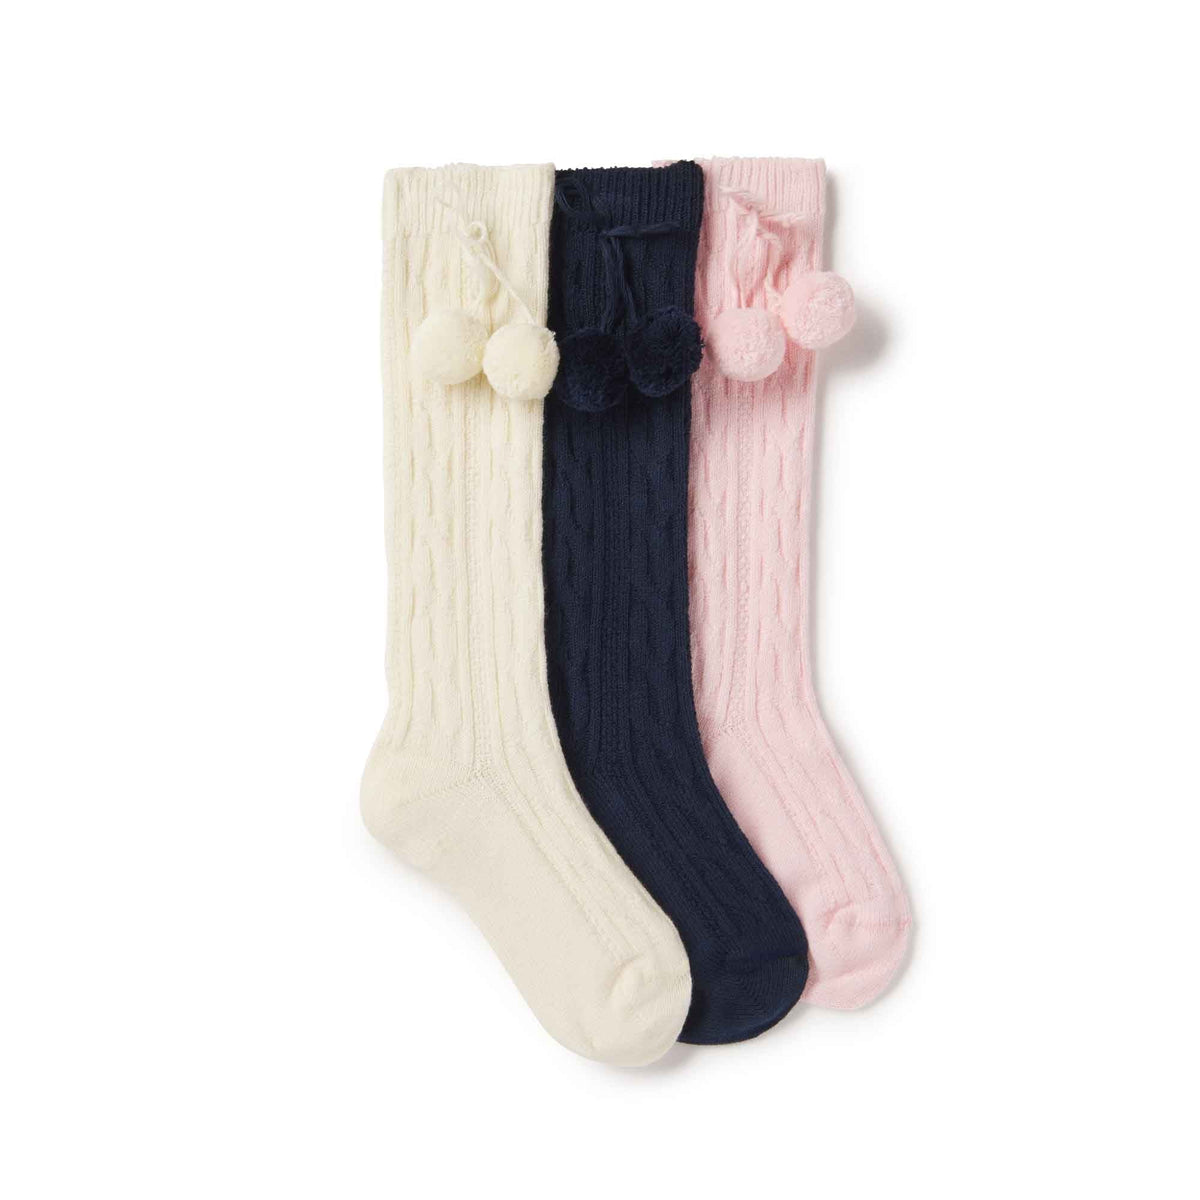 Classic and Preppy Regan Knee High Cable Socks with Pom Poms 3 Pack-Accessory-Heritage Multi-S (2T-5Y)-CPC - Classic Prep Childrenswear